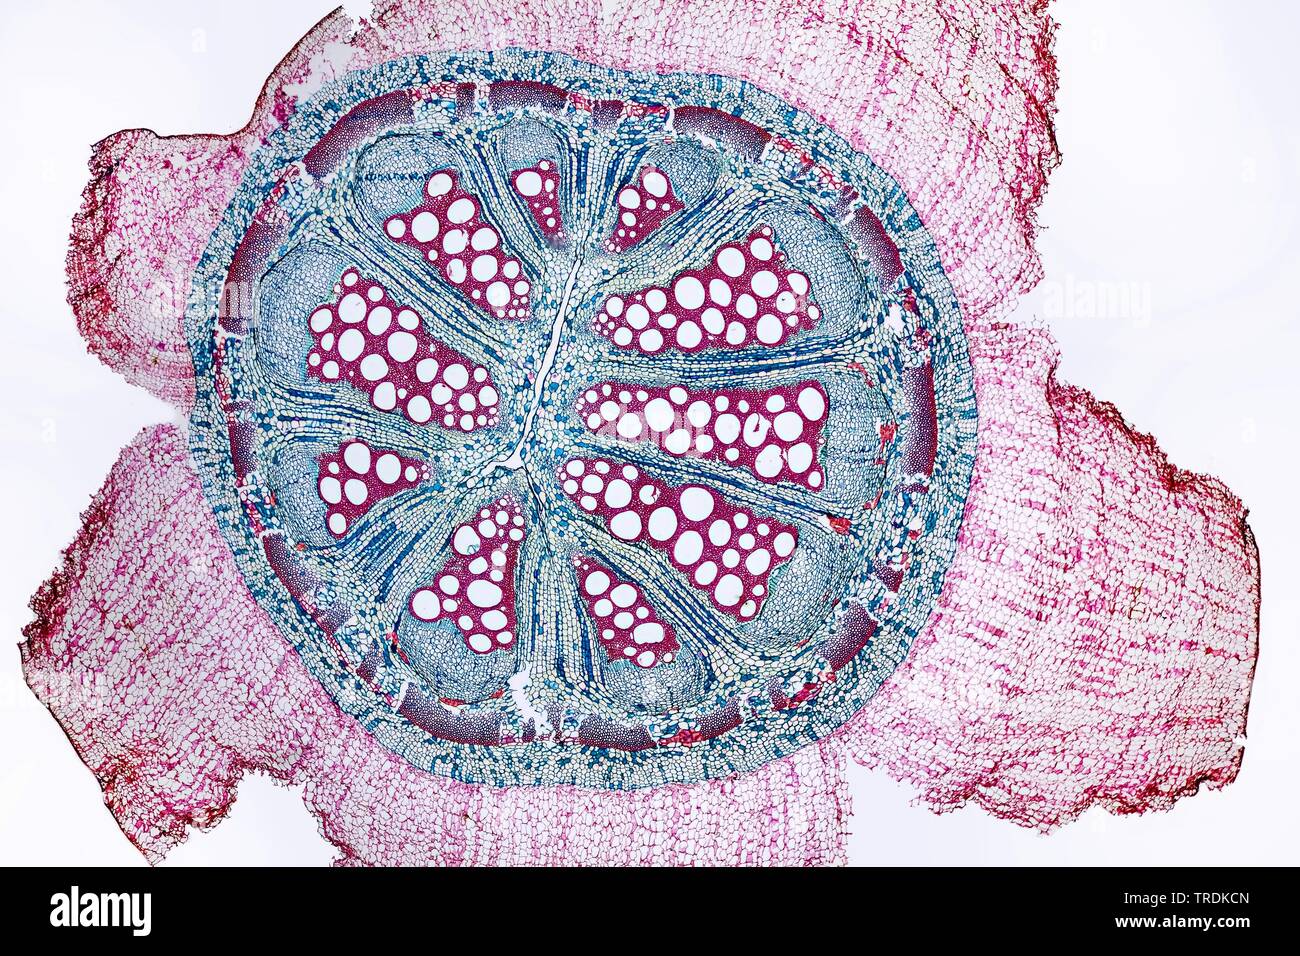 dutchman's pipe, pipe vine (Aristolochia macrophylla, Aristolochia sipho), cross section of a sprout, x 12 Stock Photo